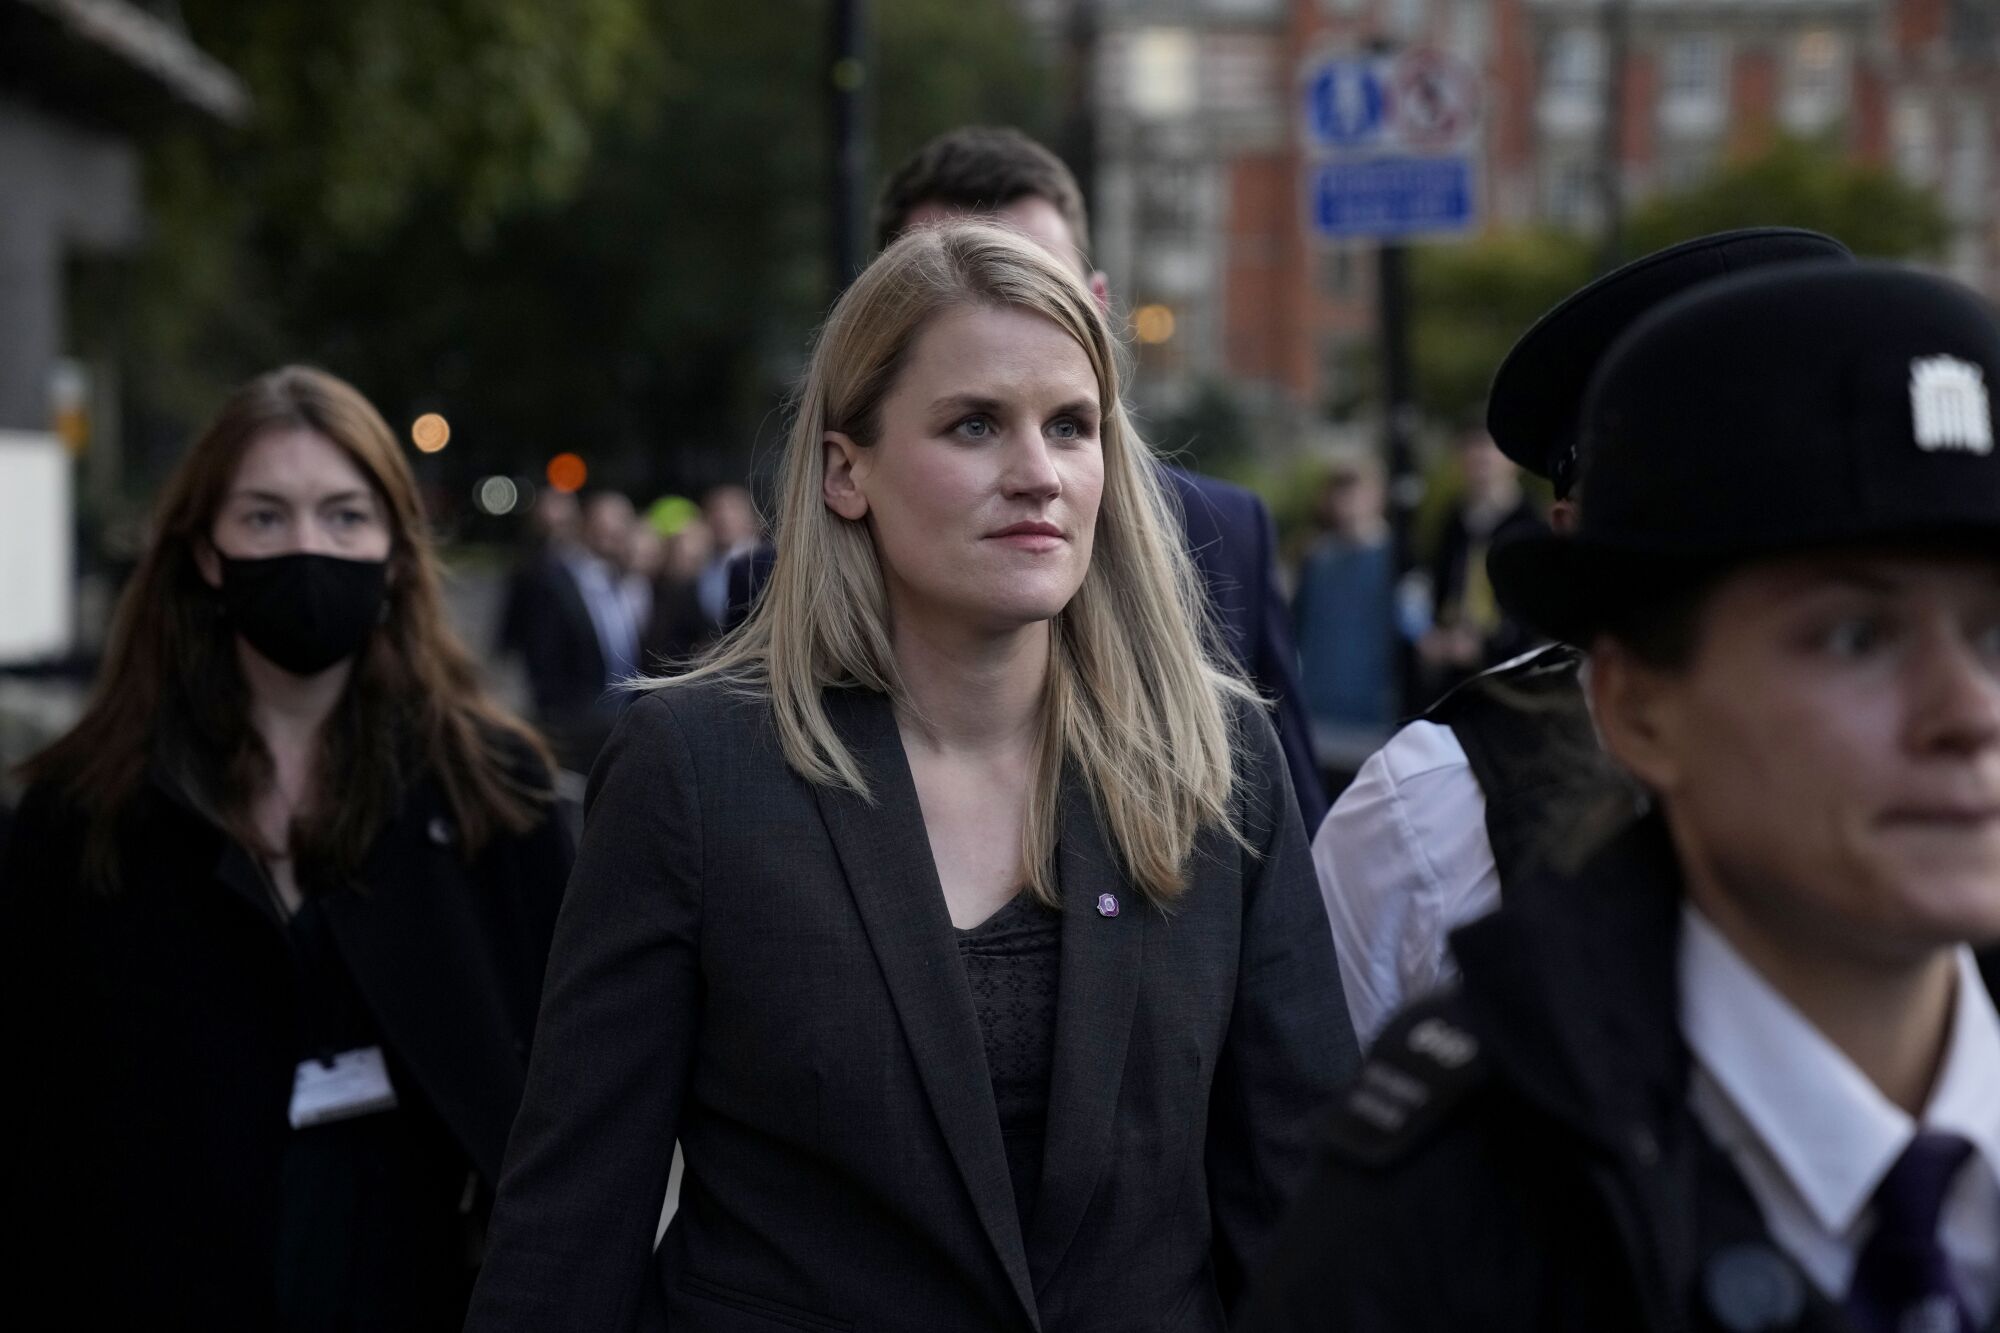 Facebook whistleblower Frances Haugen leaves after giving evidence at the Houses of Parliament in London.